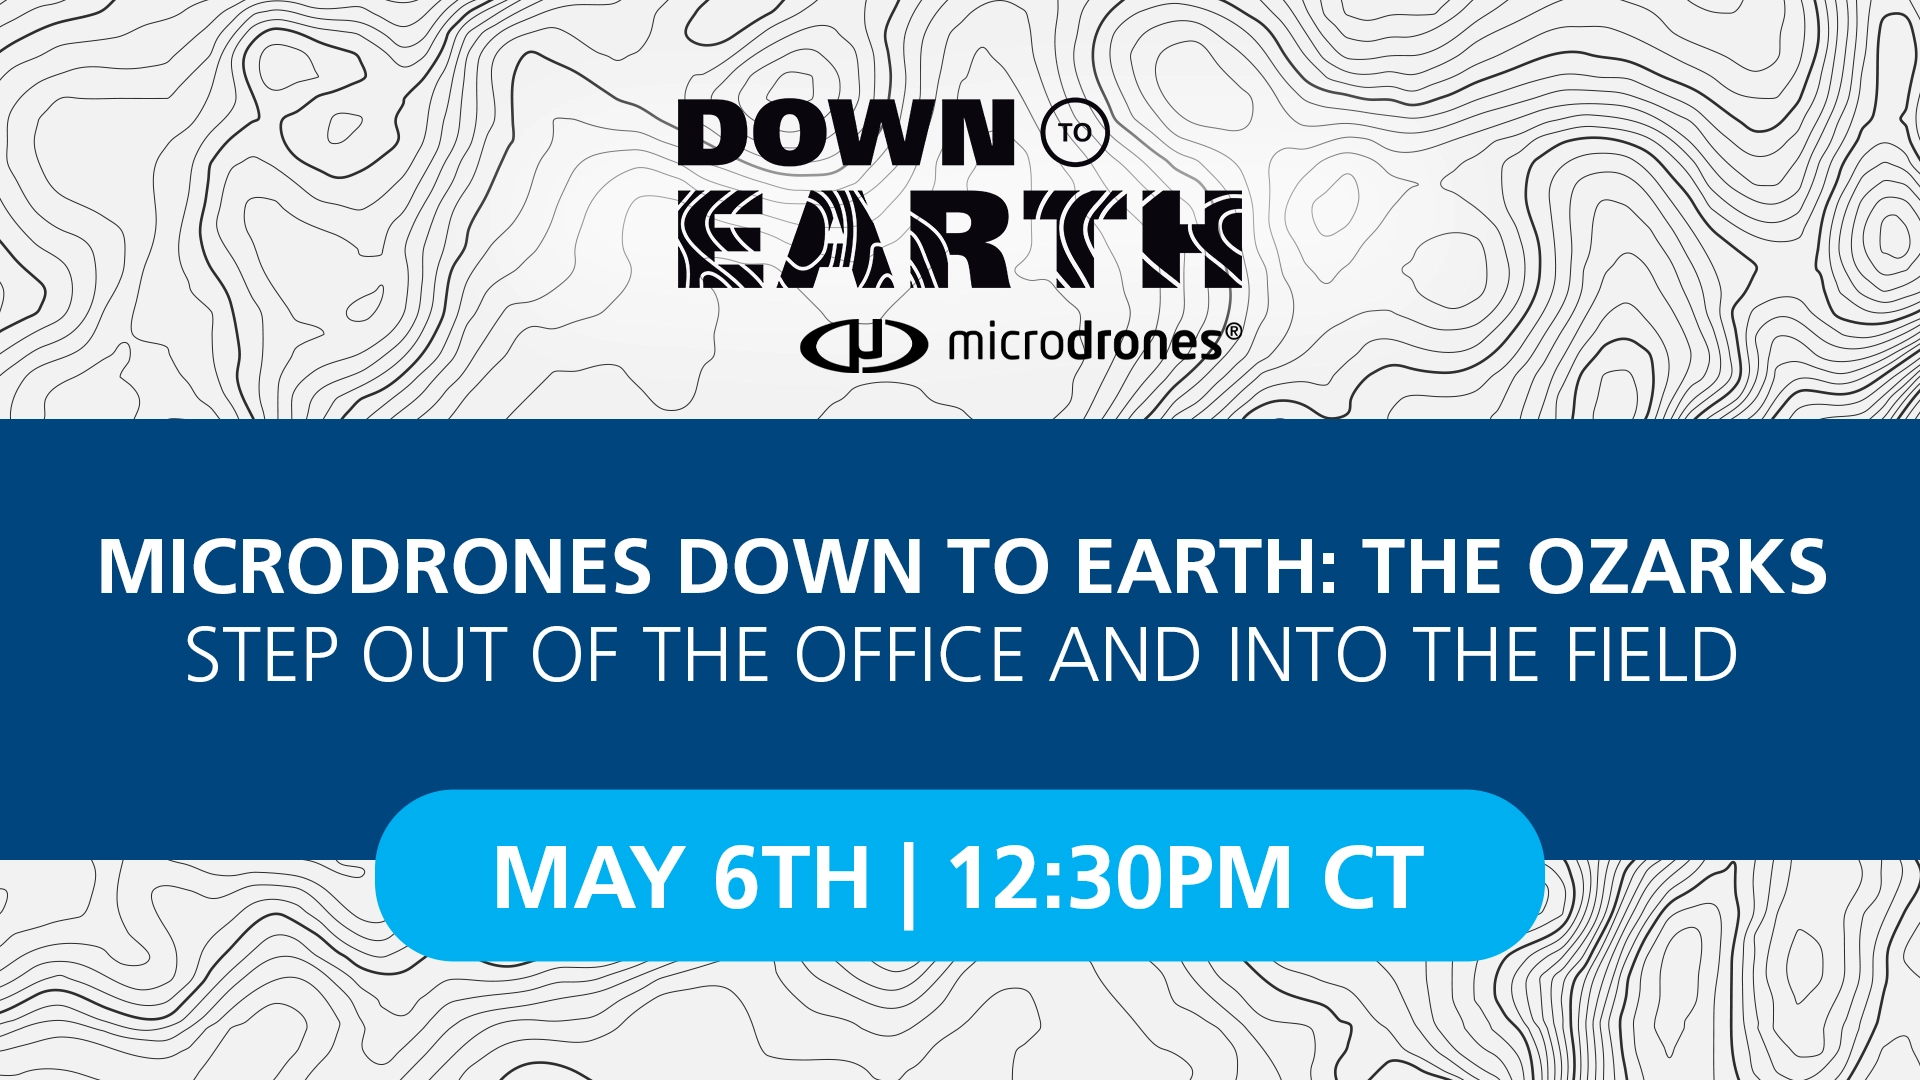 Microdrones Down To Earth: The Ozarks Step out of the office and into the field